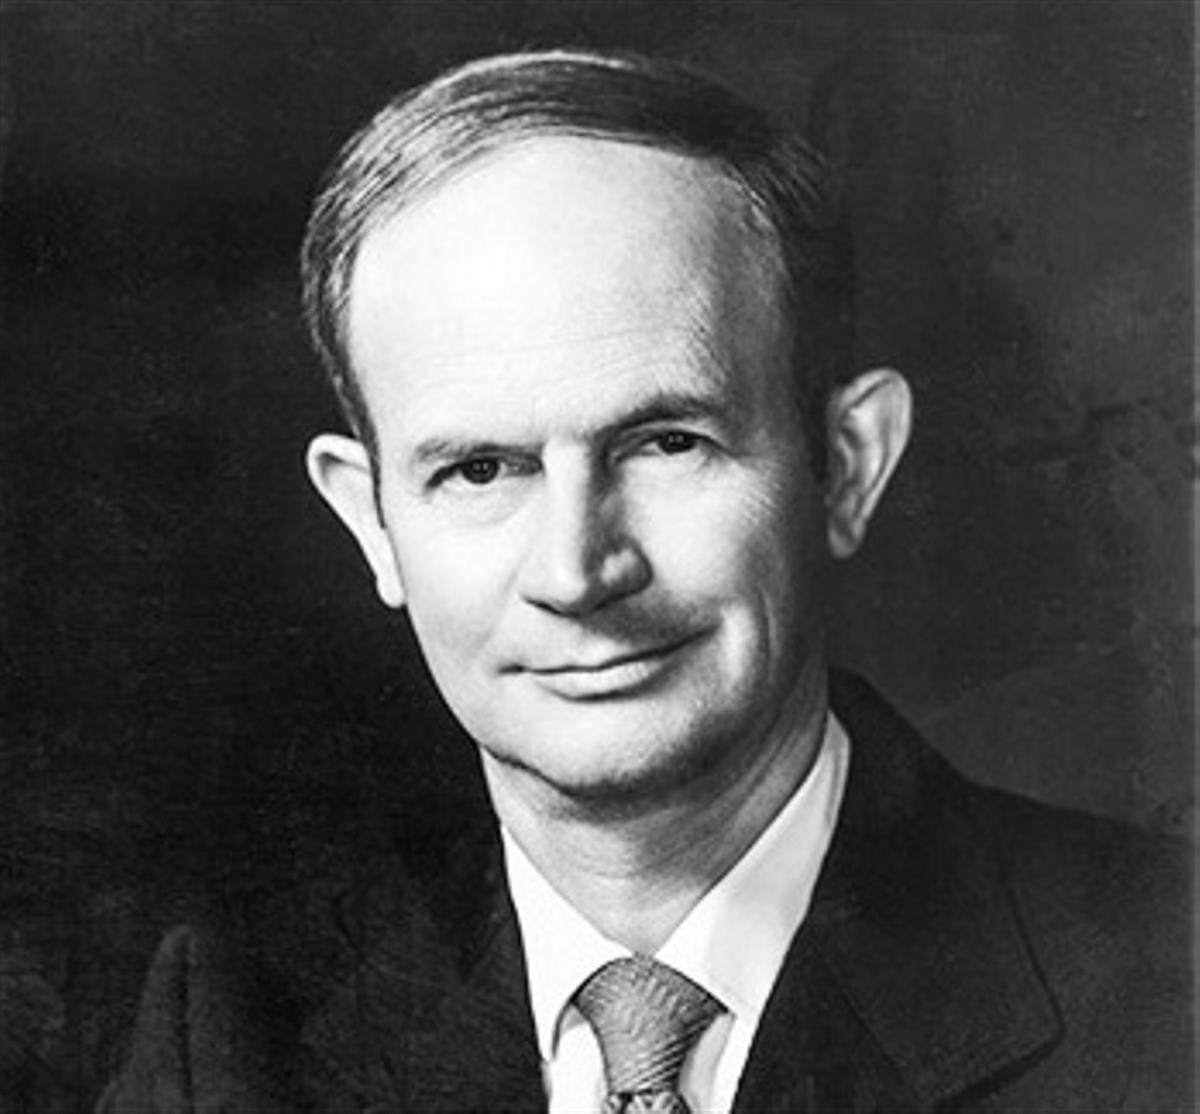 Charlie Strang, inventor of the sterndrive